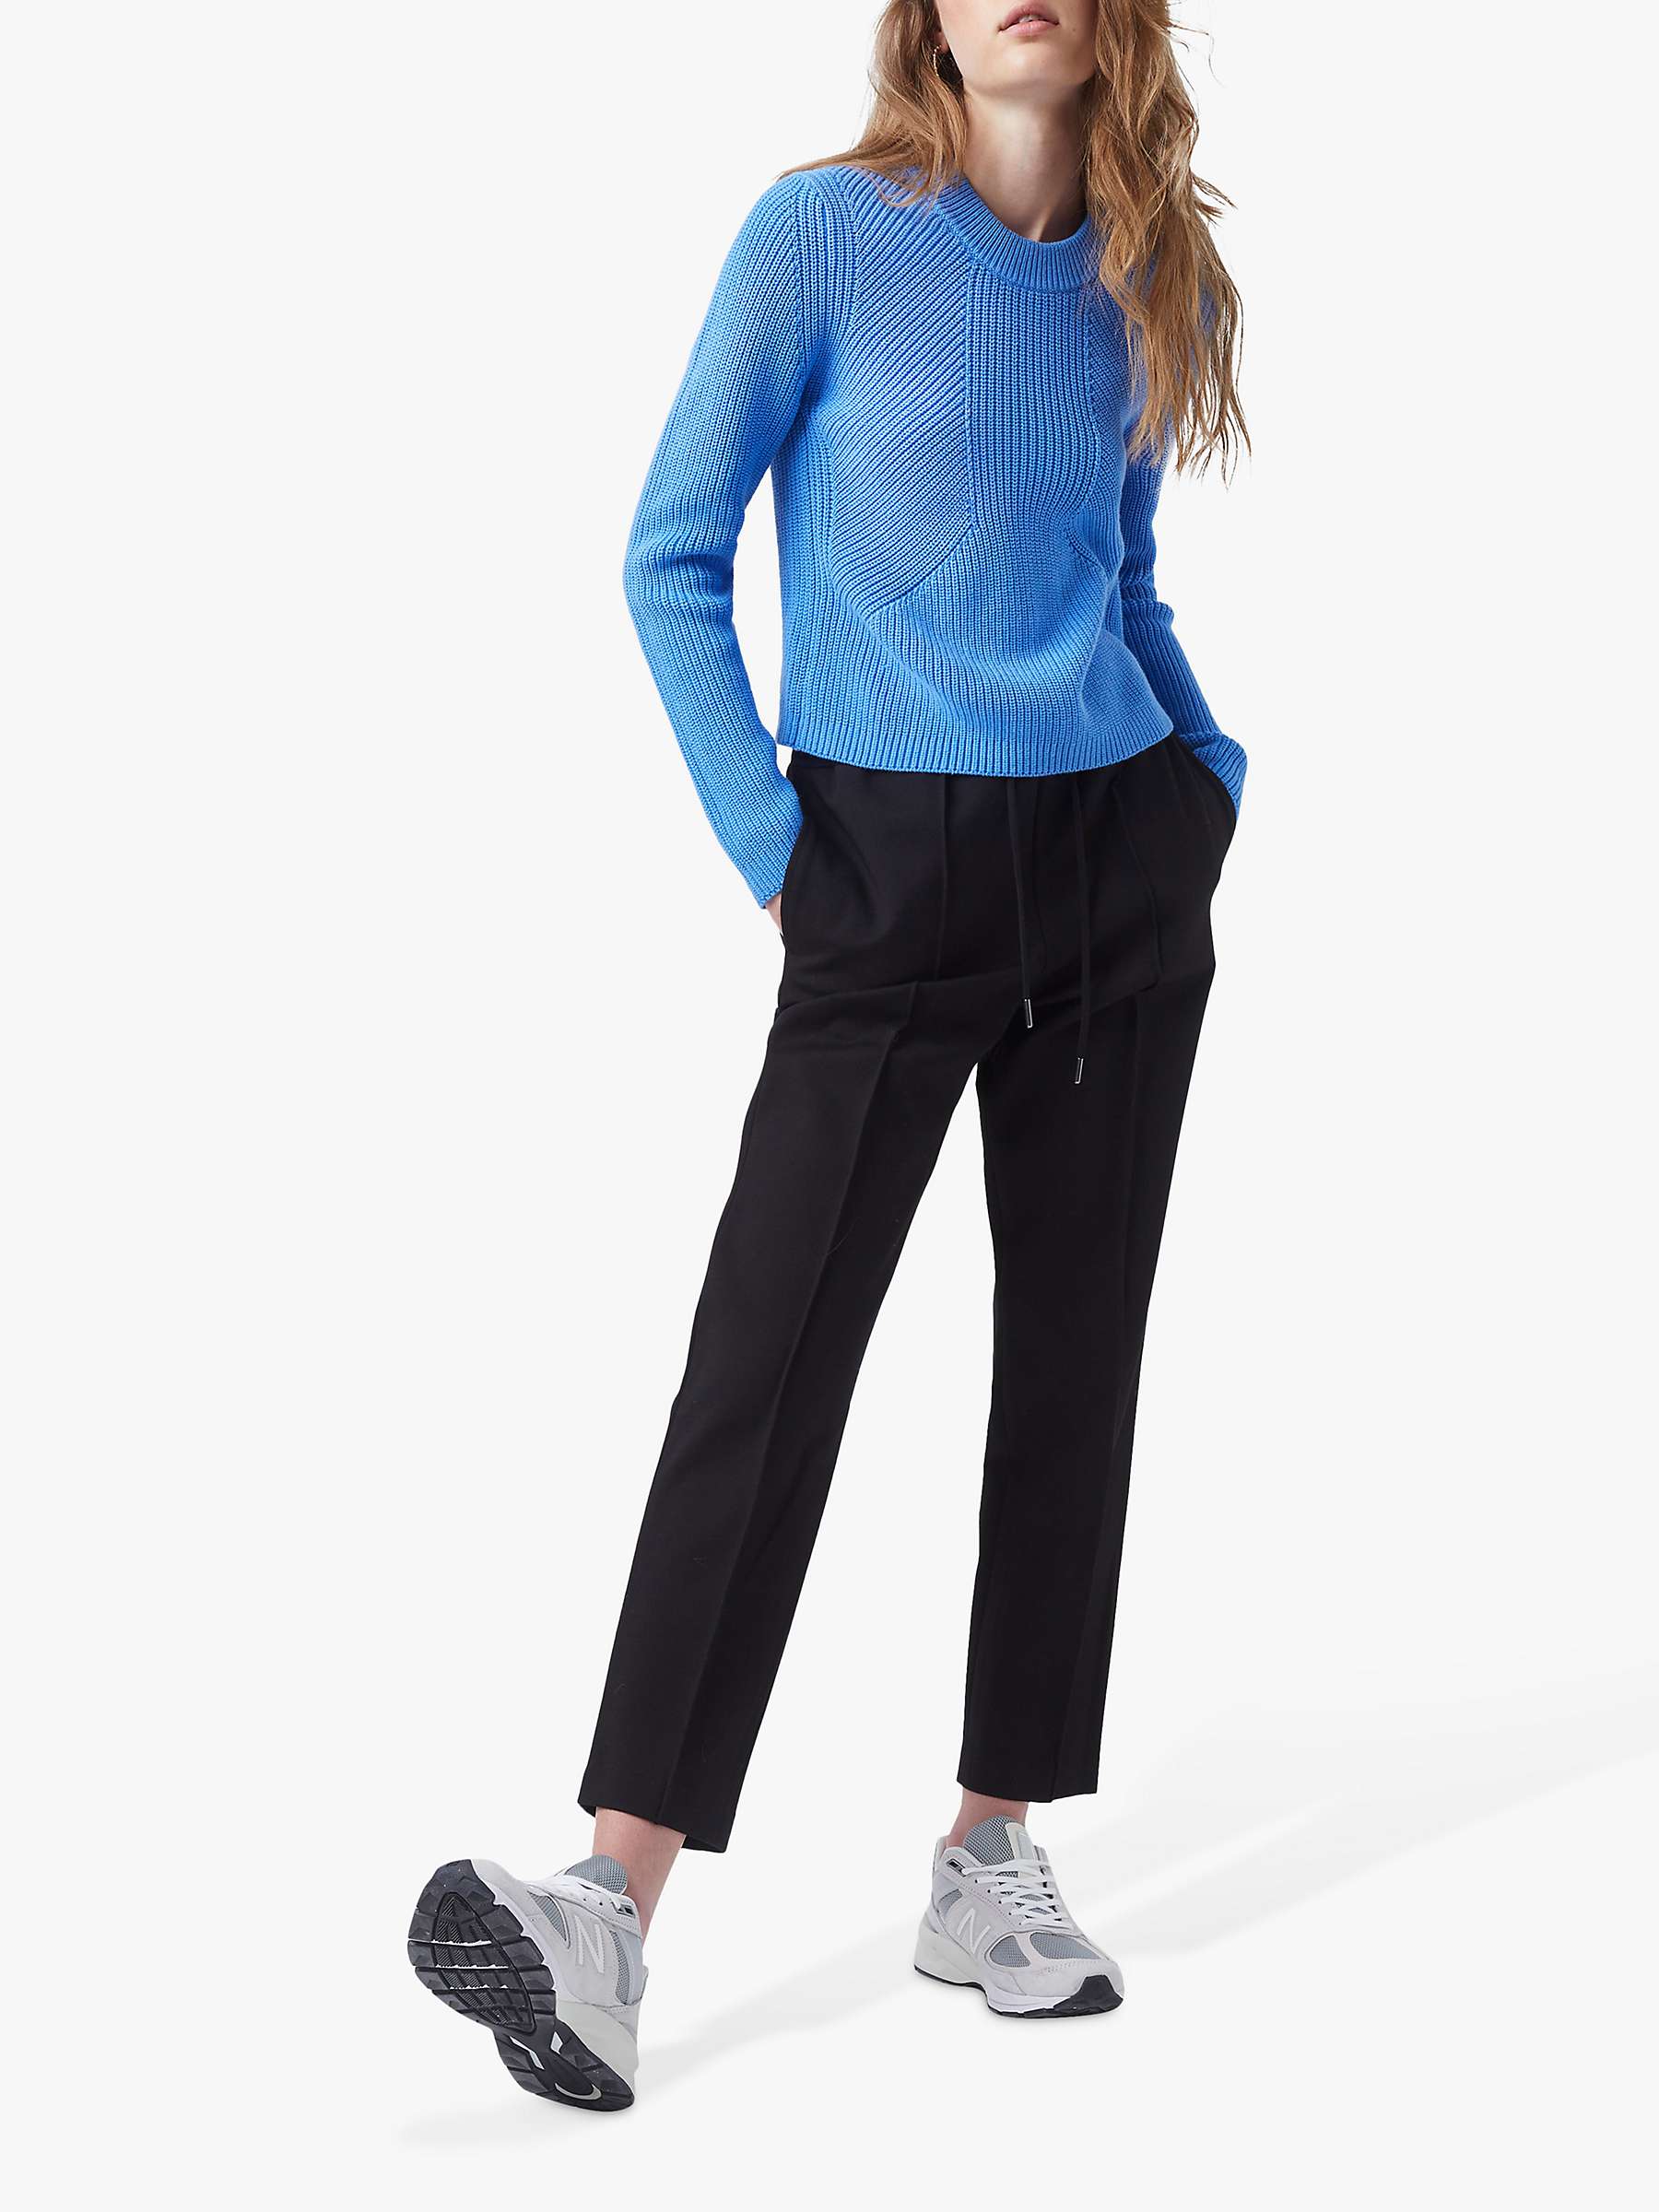 Buy French Connection Stefanie Straight Leg Trousers, Black Online at johnlewis.com